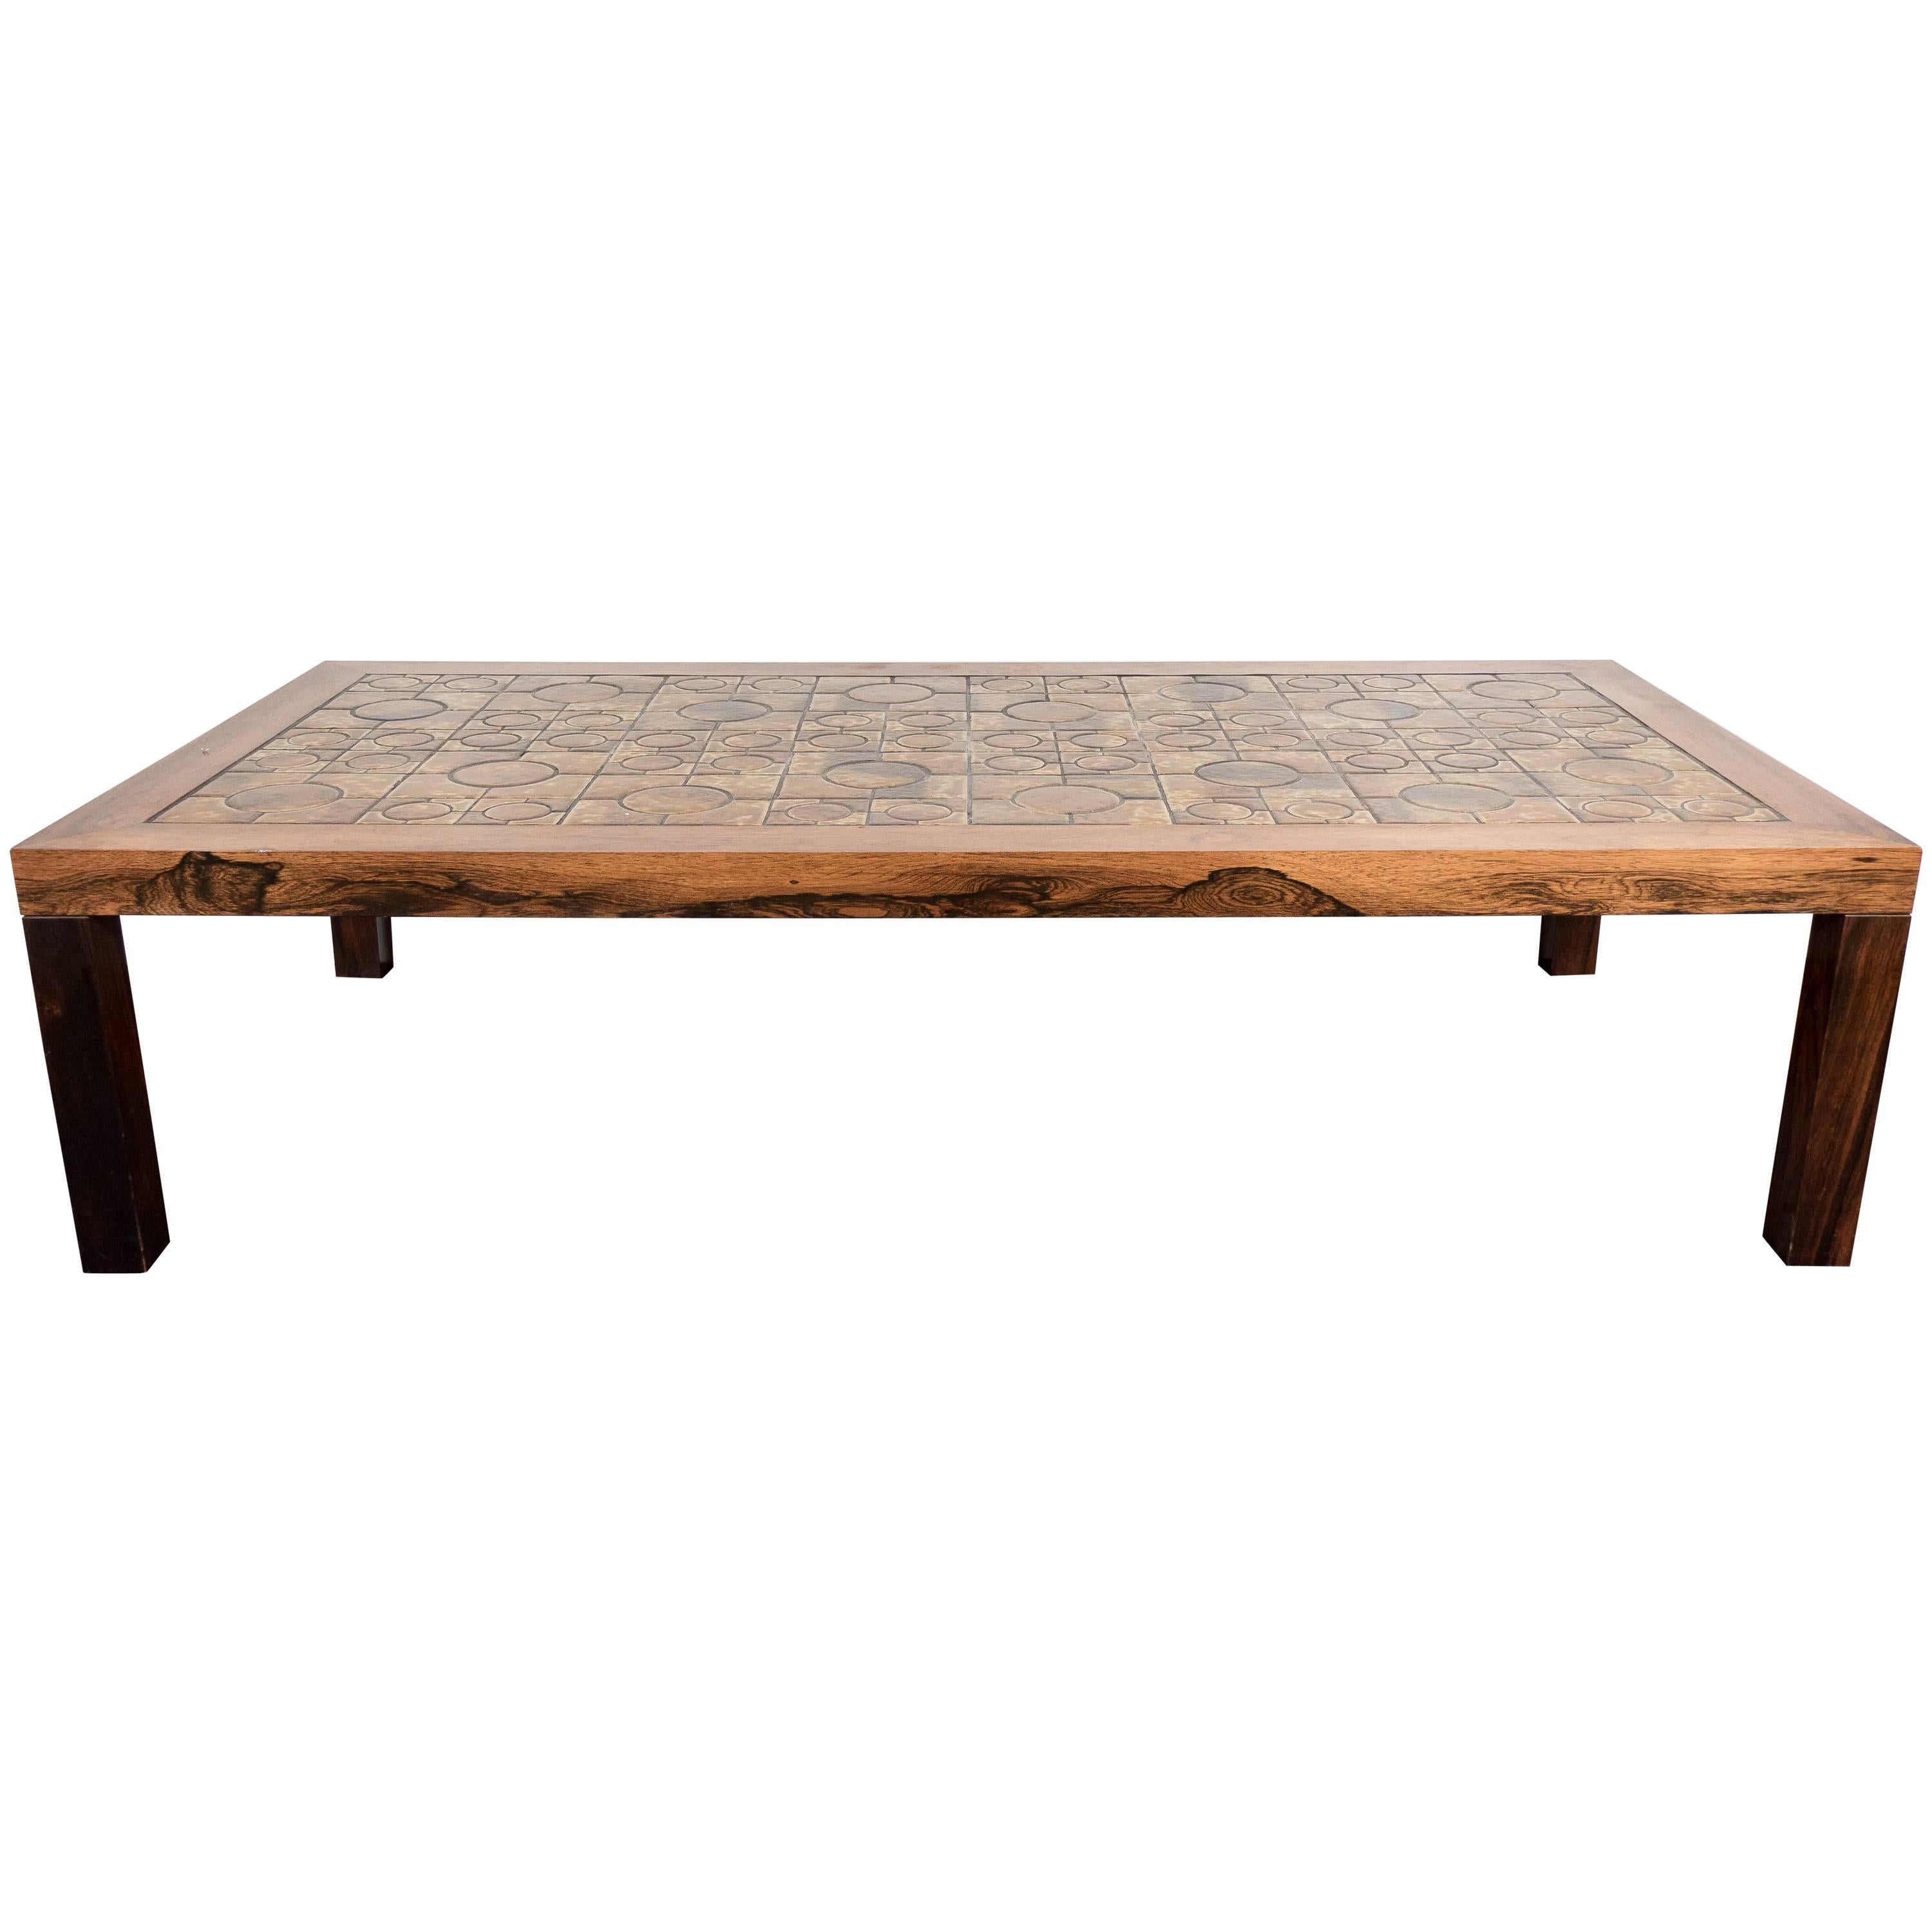 Danish Wooden Coffee Table with Clay Tile Top by Centrum Møbler